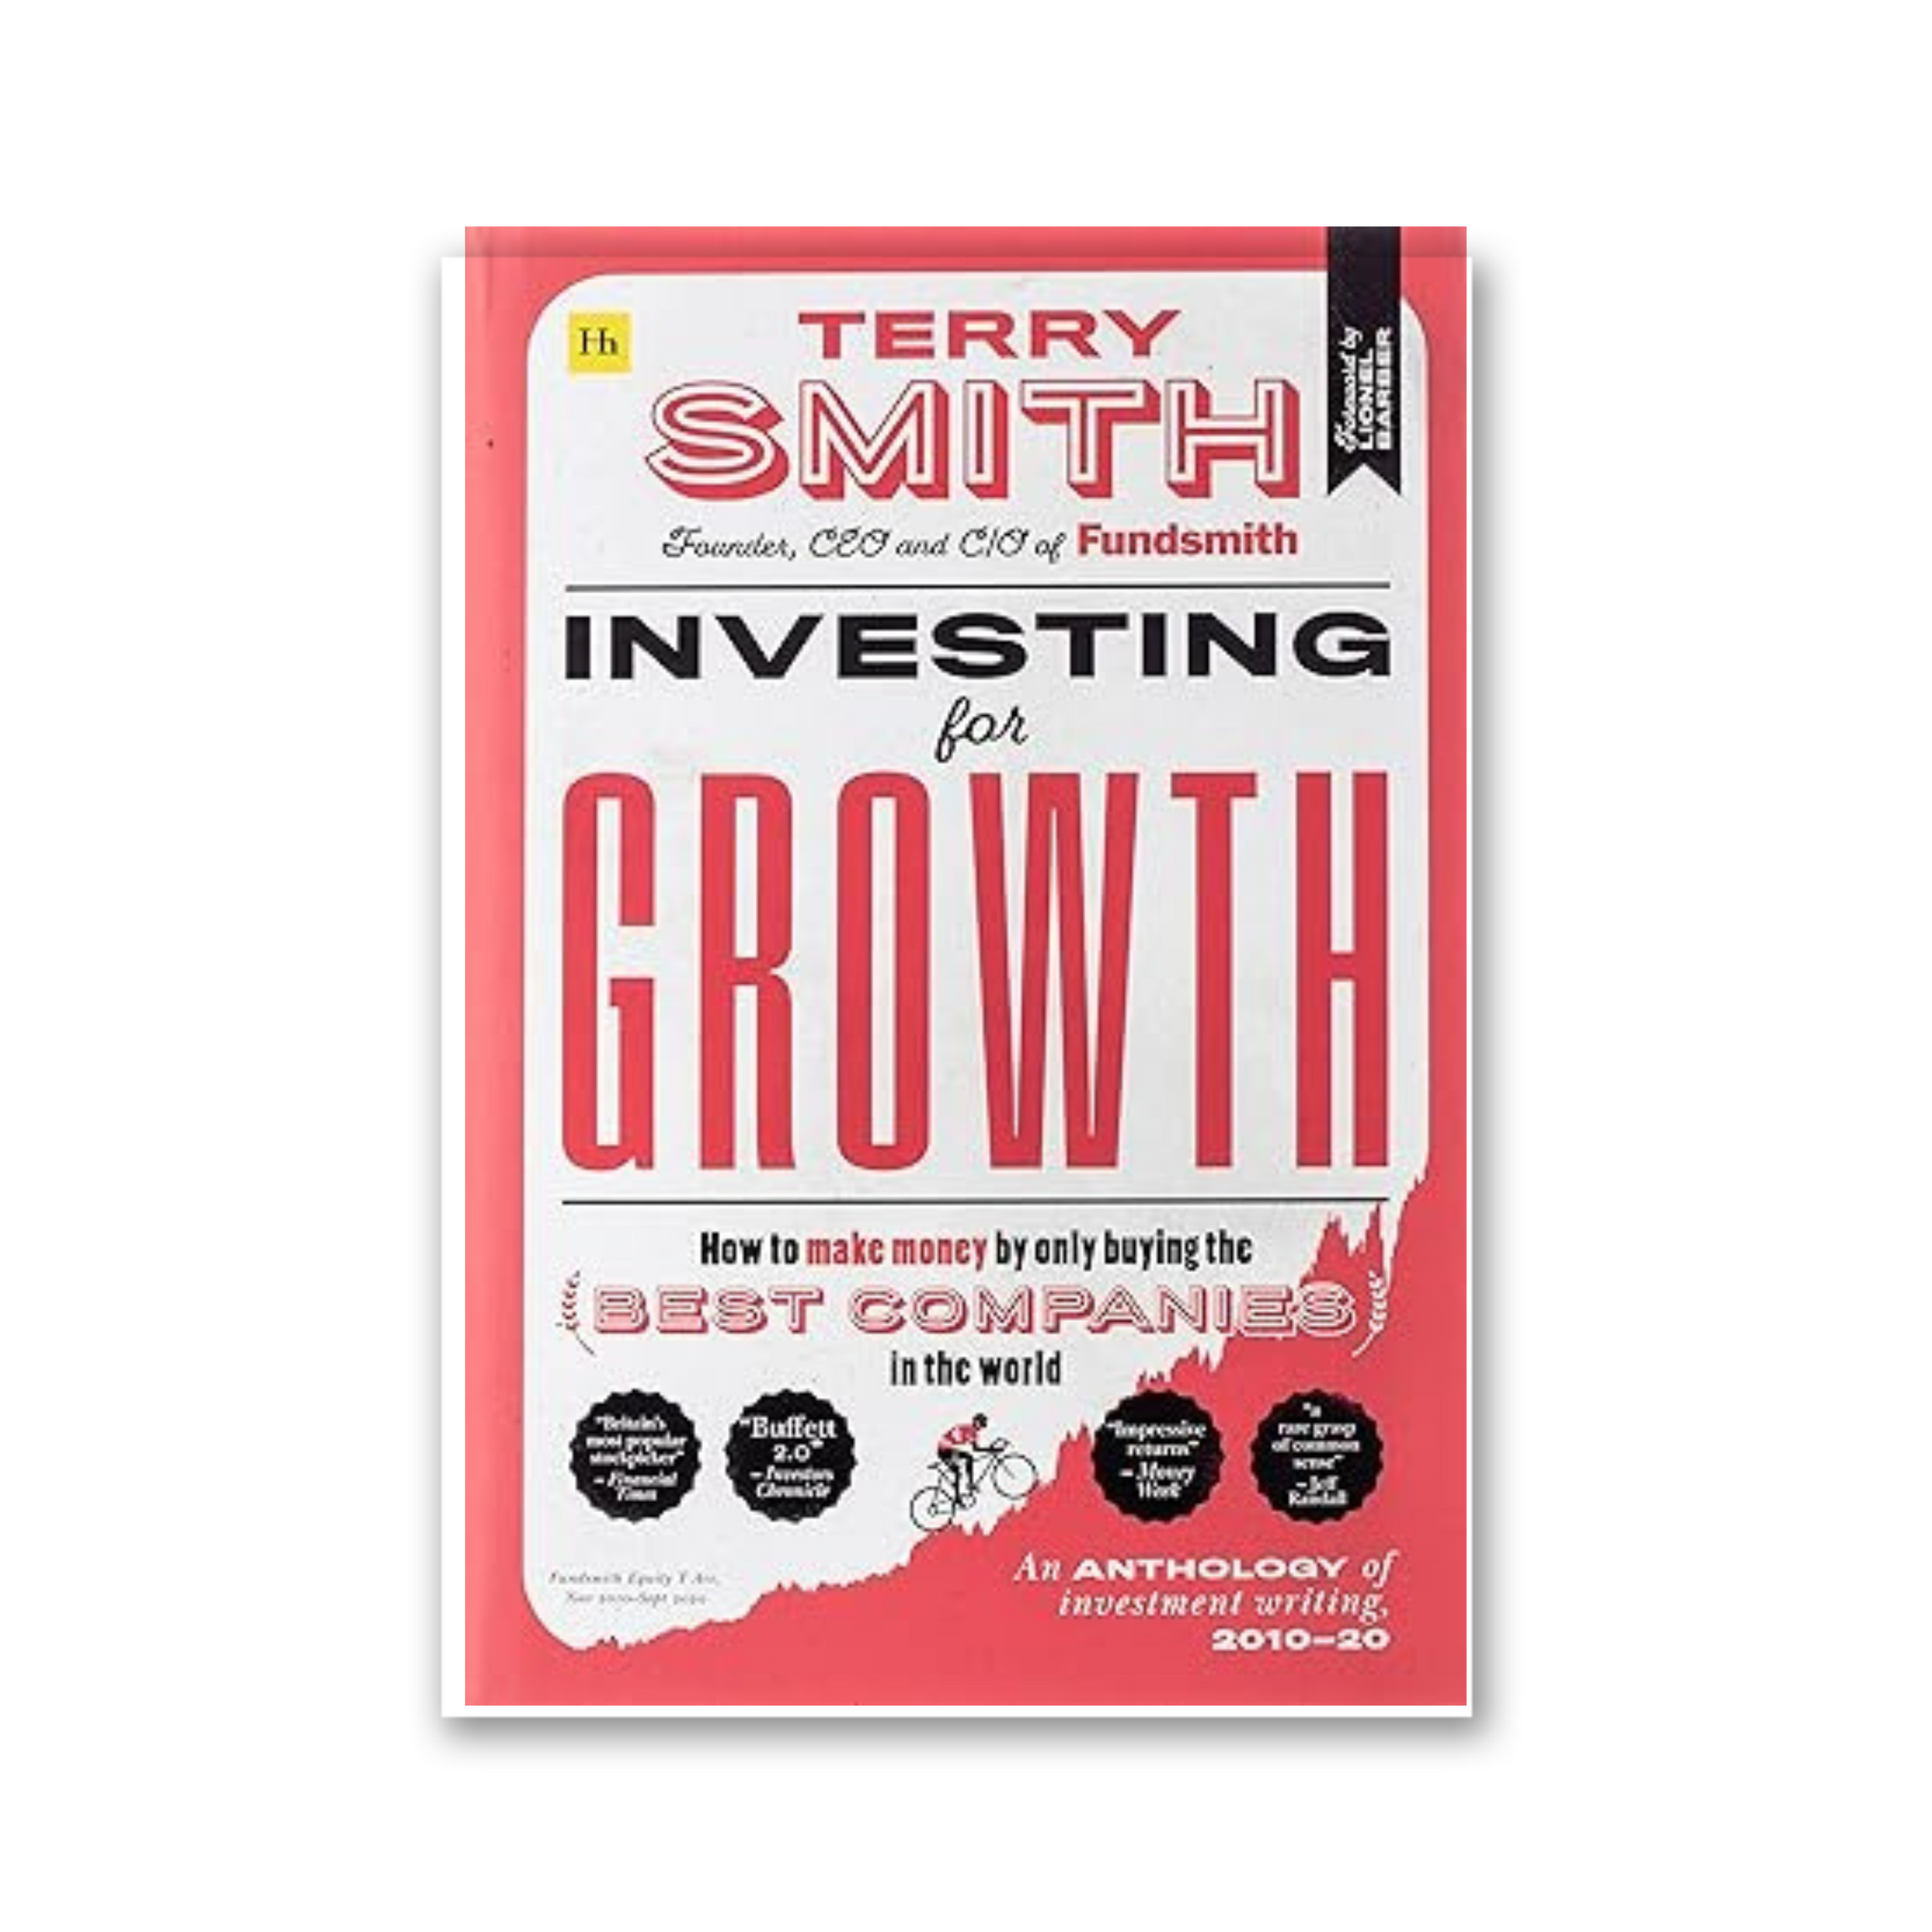 INVESTING FOR GROWTH